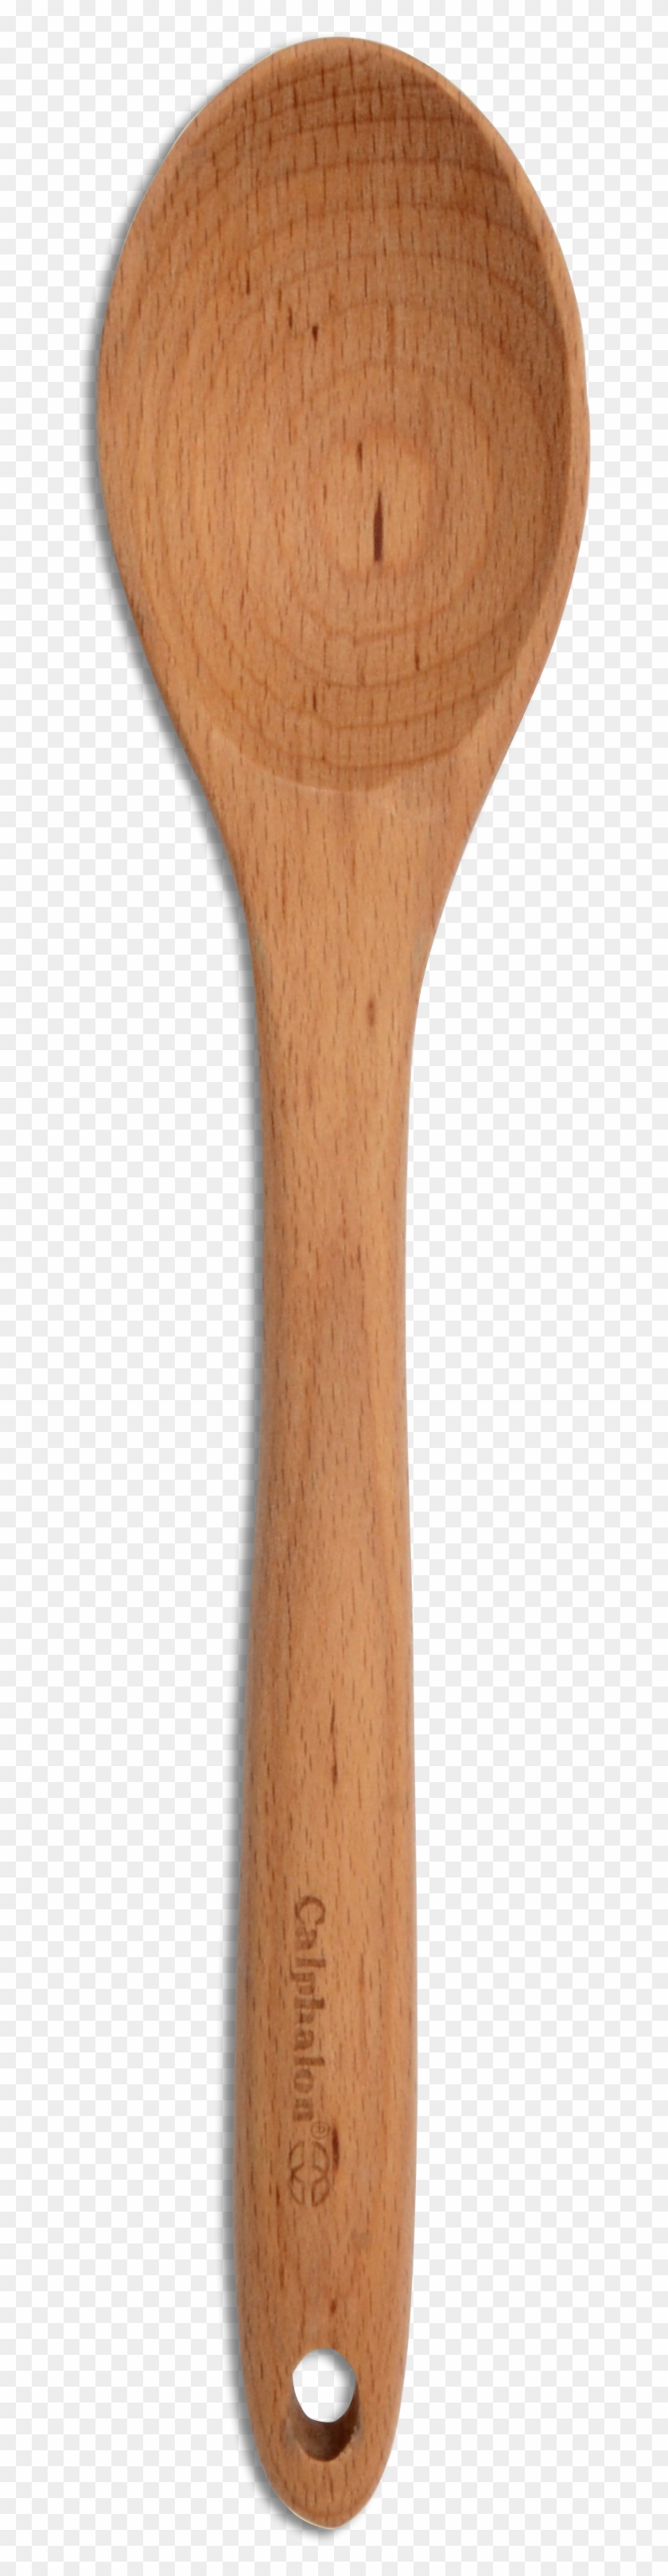 Wooden Spoon Png - Wood Spoon Top Png Clipart #1810057